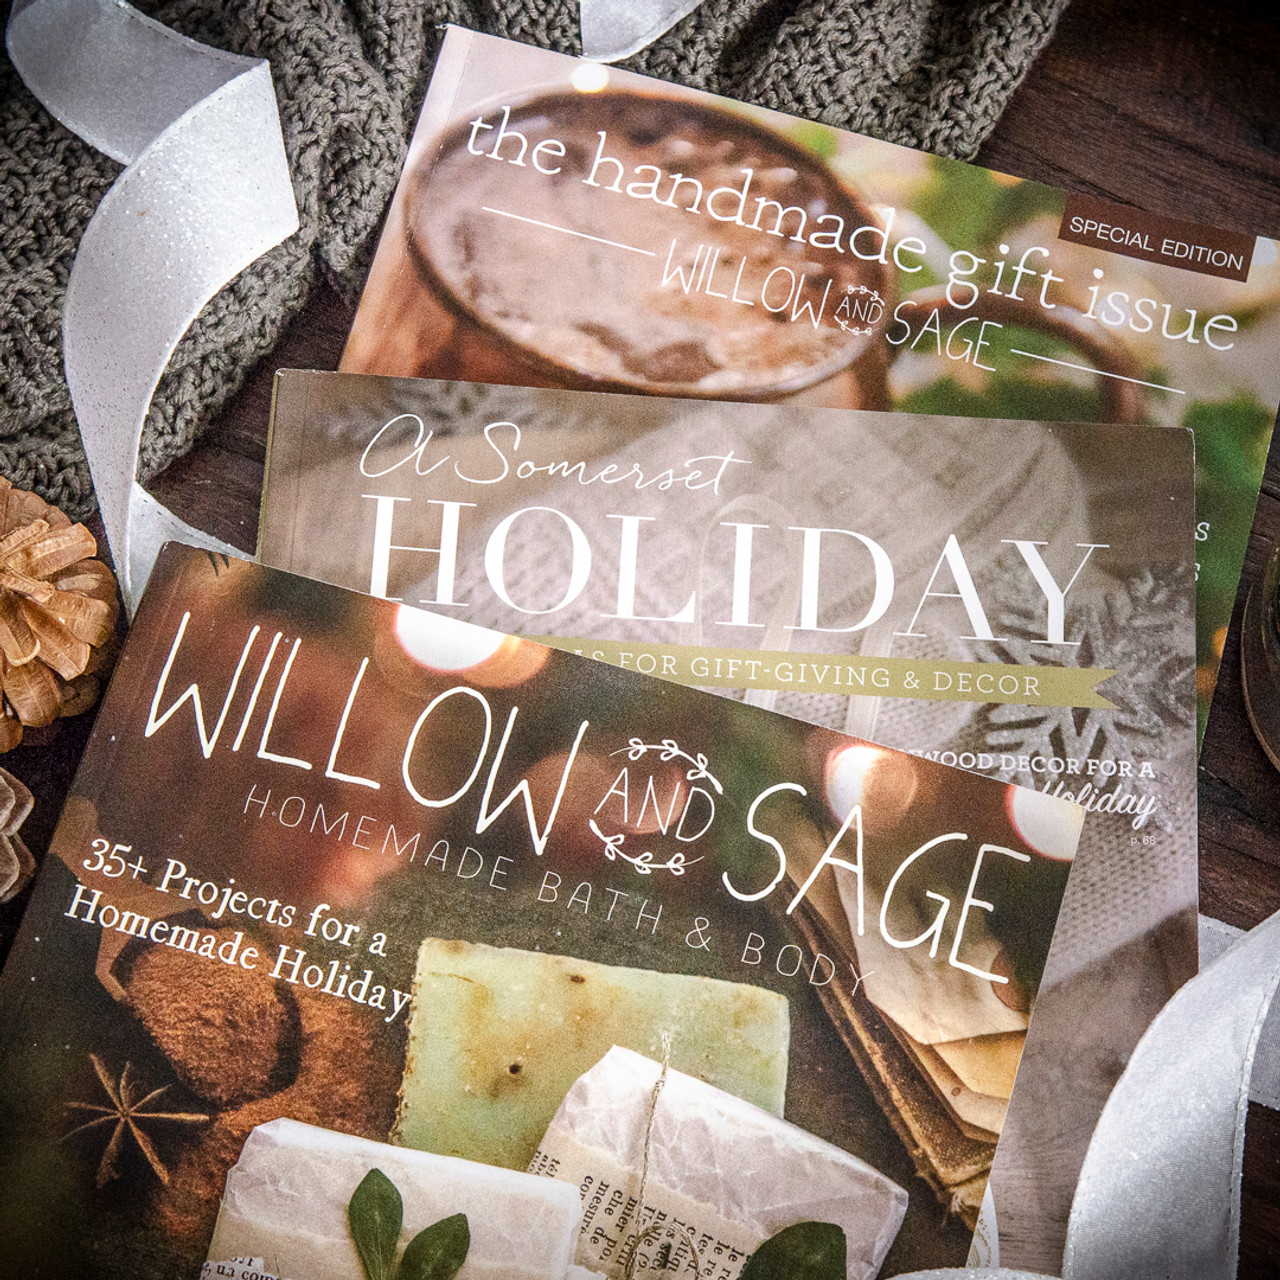 Willow and Sage Handmade Gift Issue Volume 1